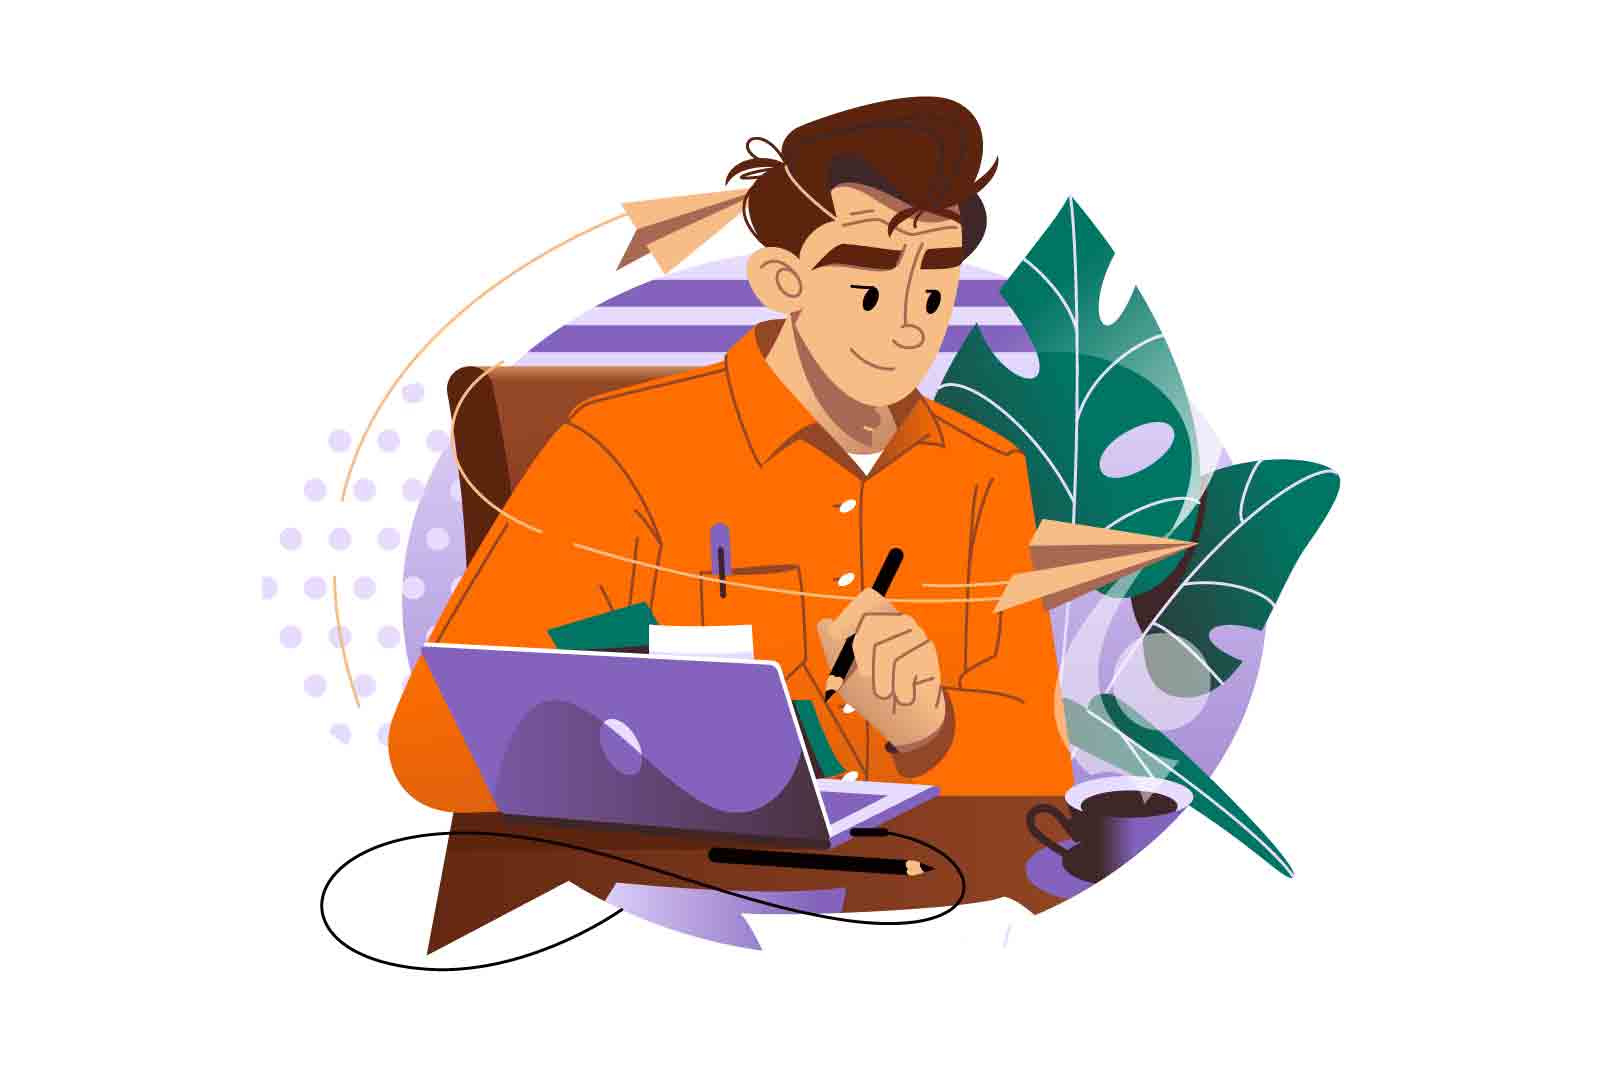 Character man working on project at a desk in office vector illustration. Focused wor process concept.